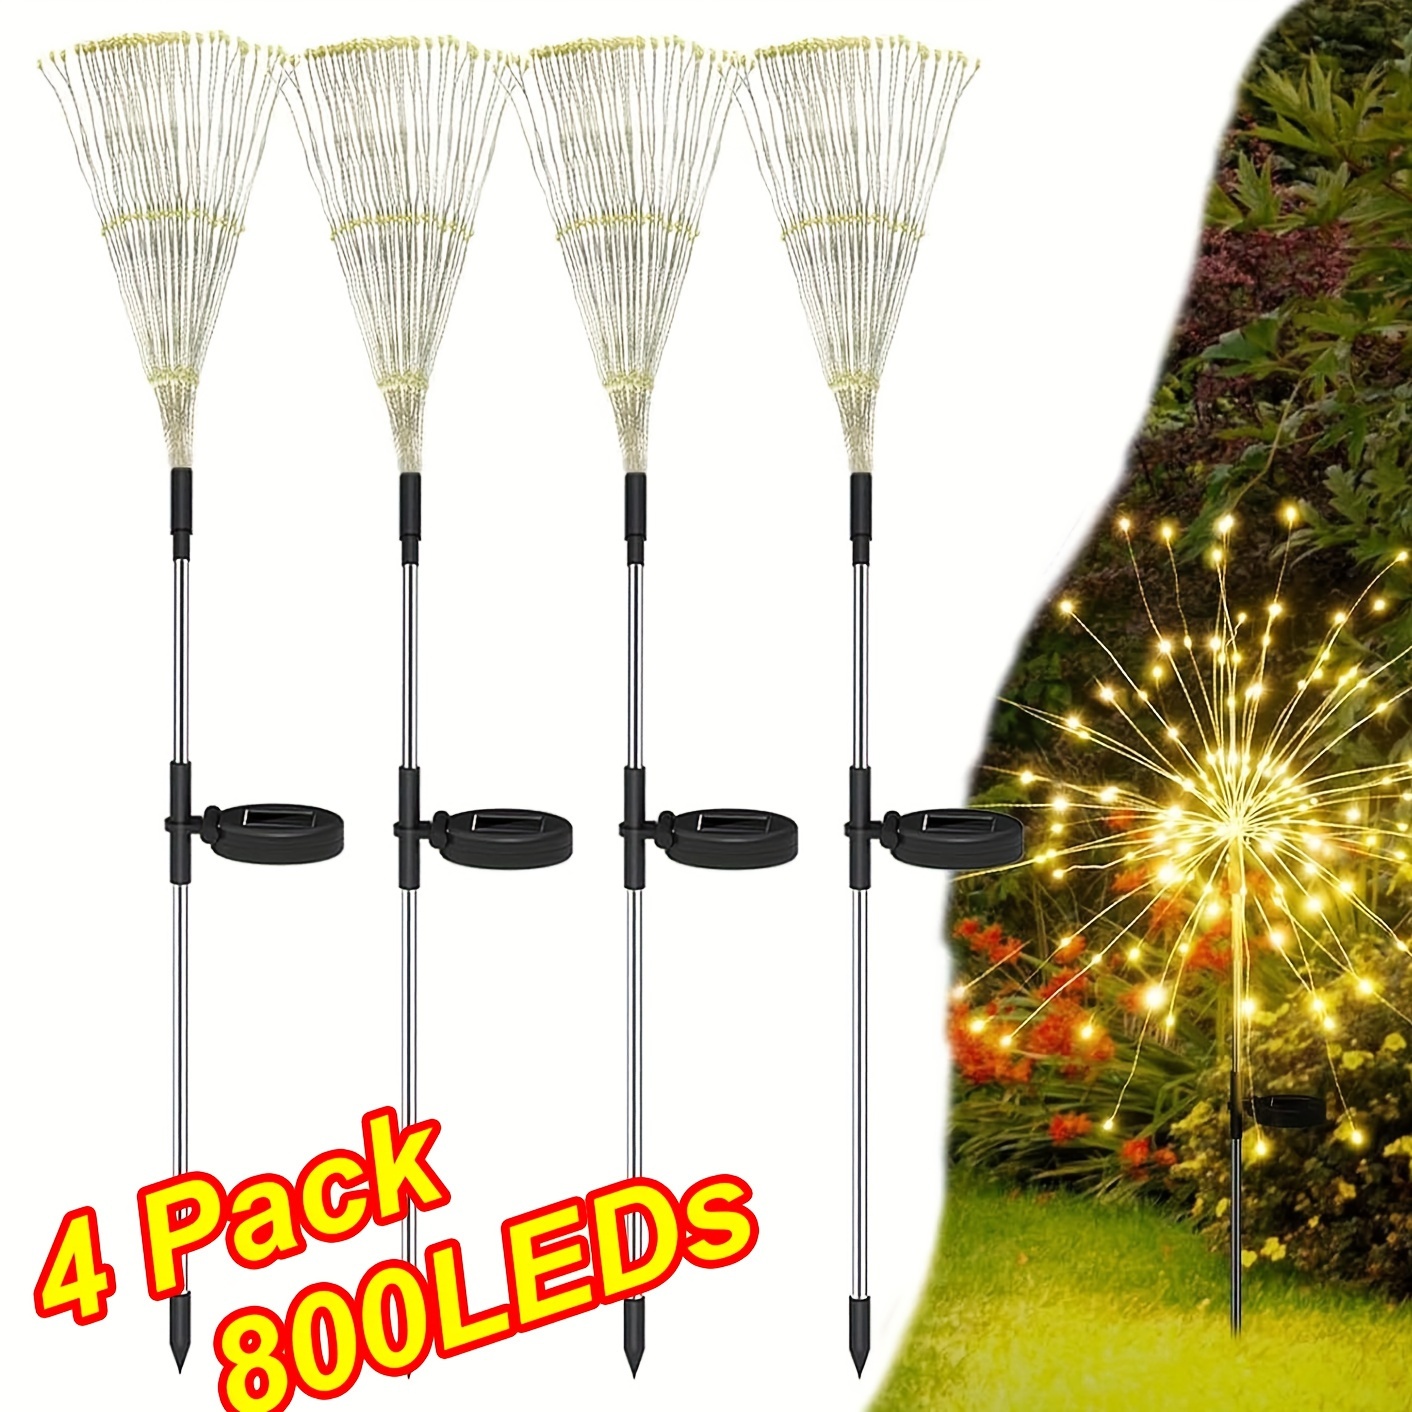 

Solar Lights Outdoor For Garden Decor 4 Pack 800 Led Fairy Fireworks Lights For Decorations Yard Patio Porch Backyard Plant Tree Bushes Clearance (warm/ Multicolors)